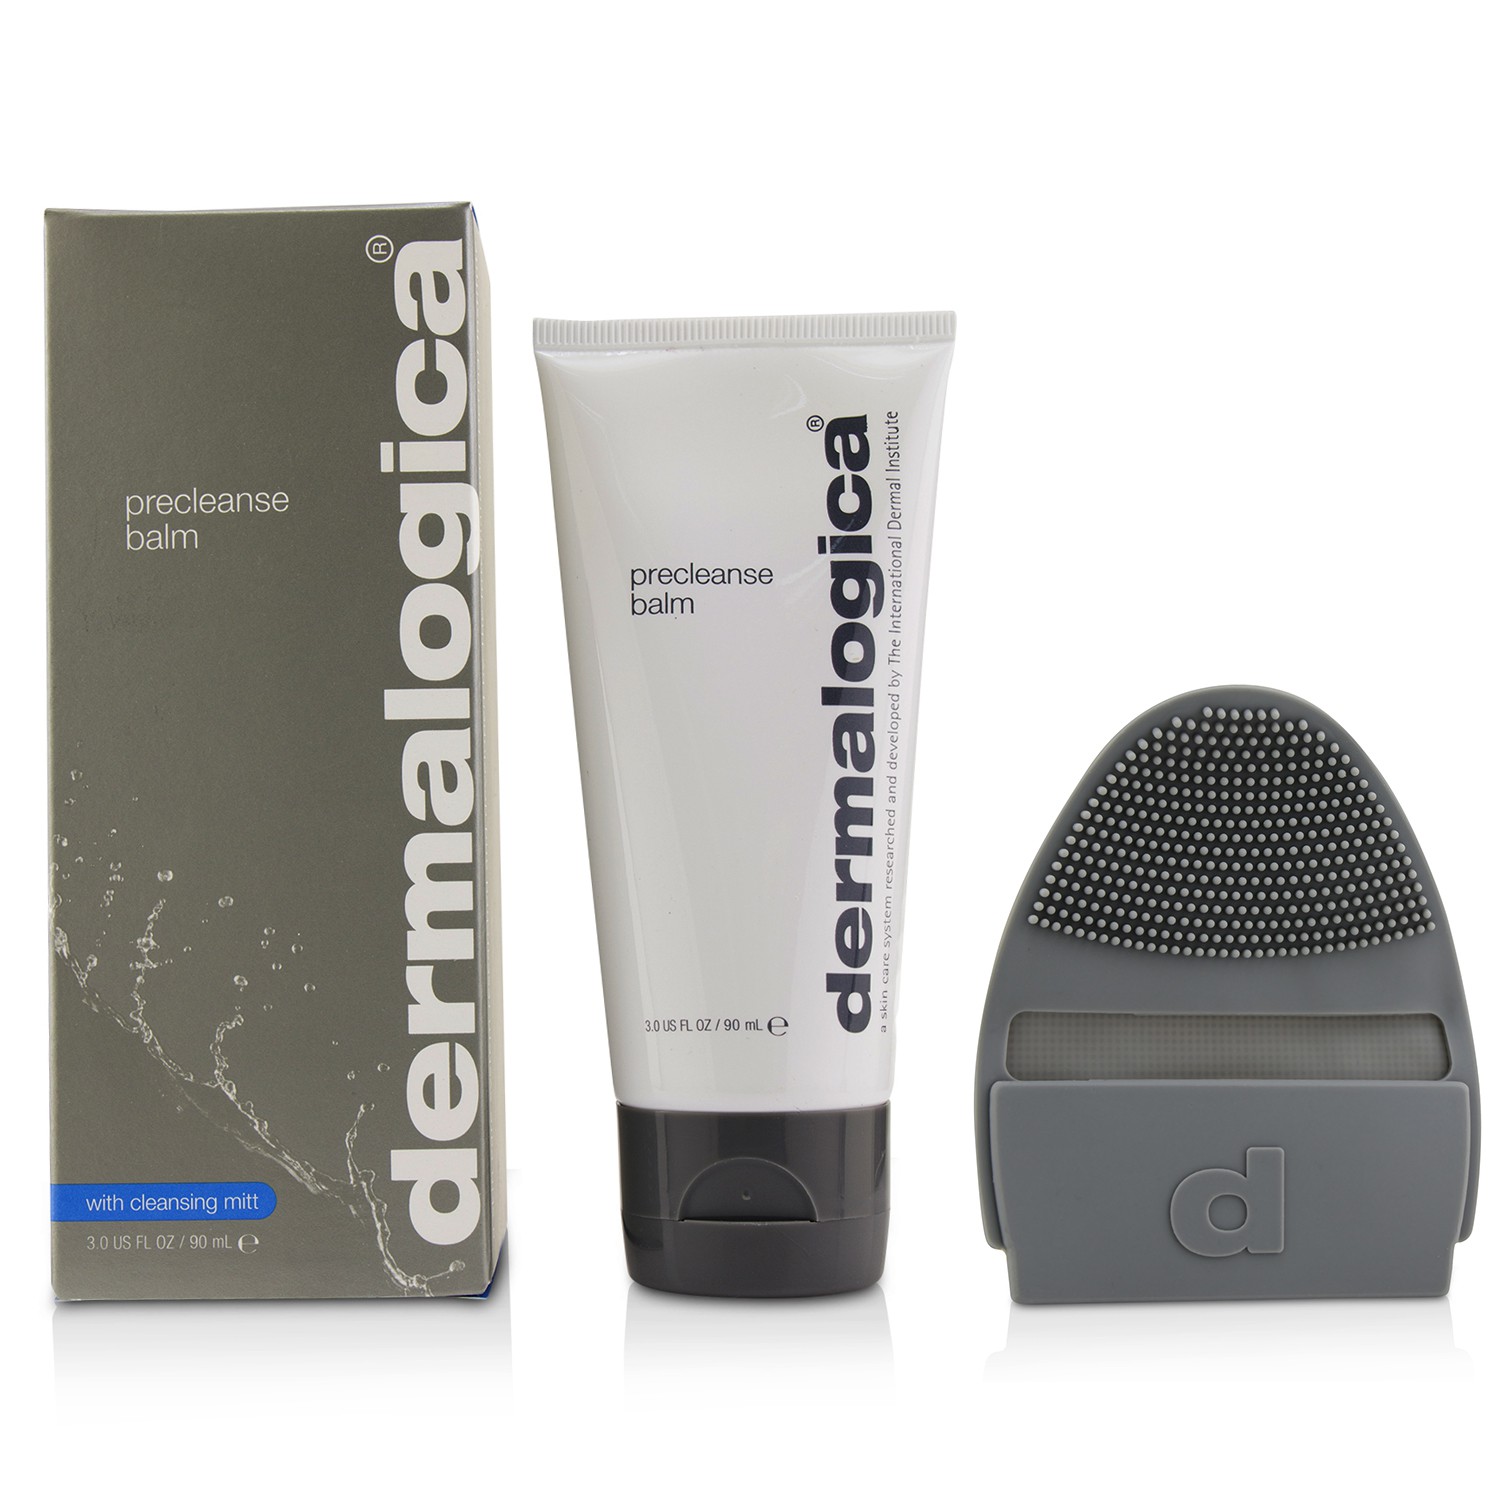 Precleanse Balm (with Cleansing Mitt) - For Normal to Dry Skin Dermalogica Image